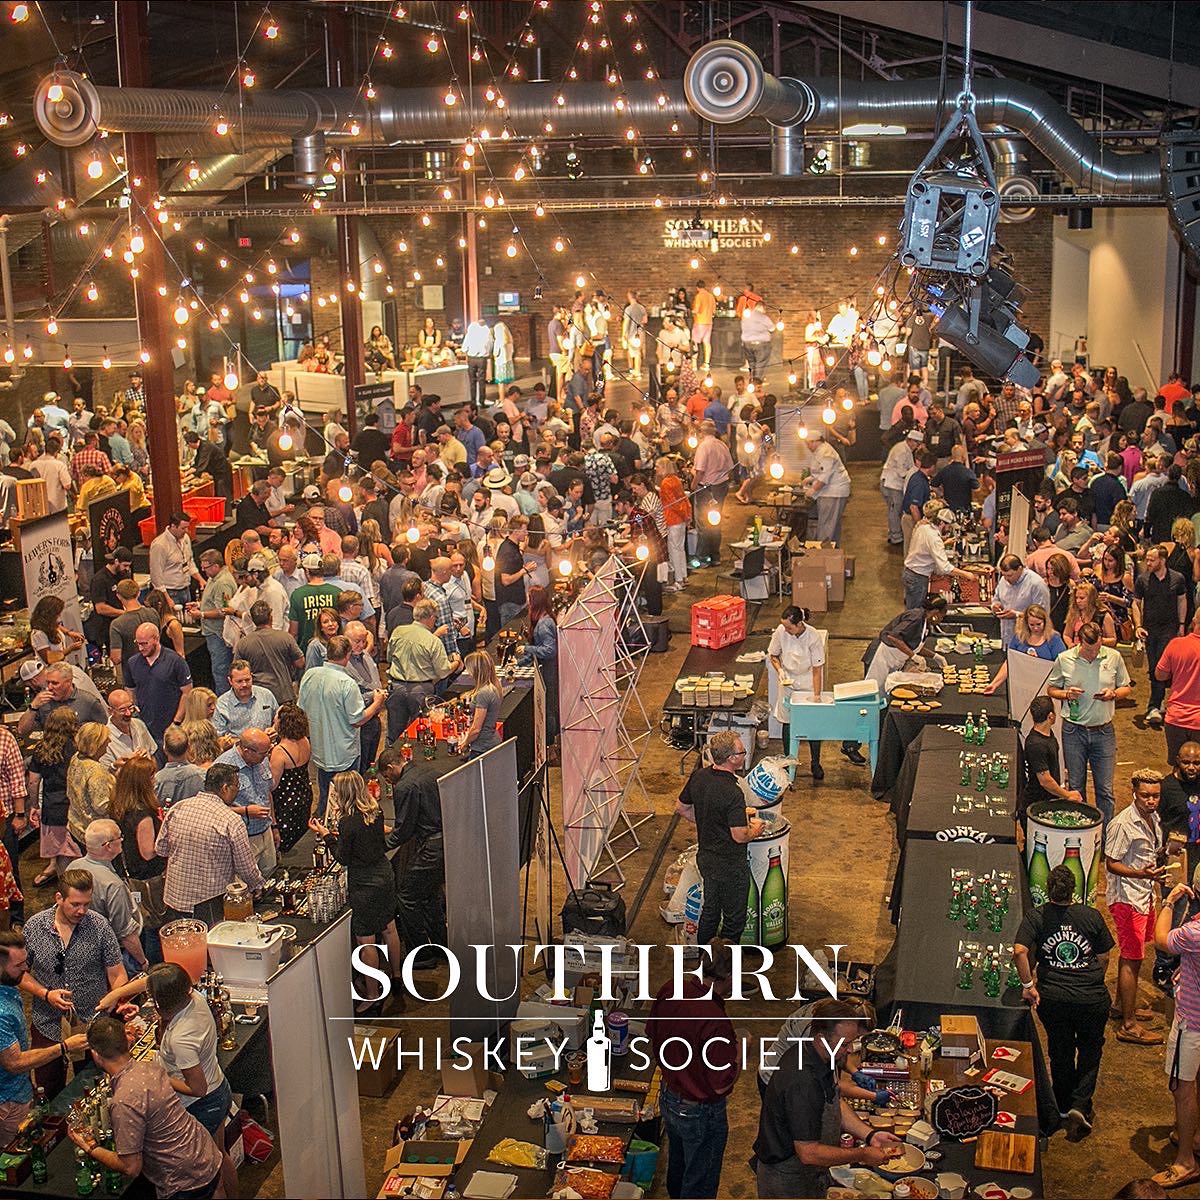 Southern Food & Whiskey Experience in downtown Franklin, TN.